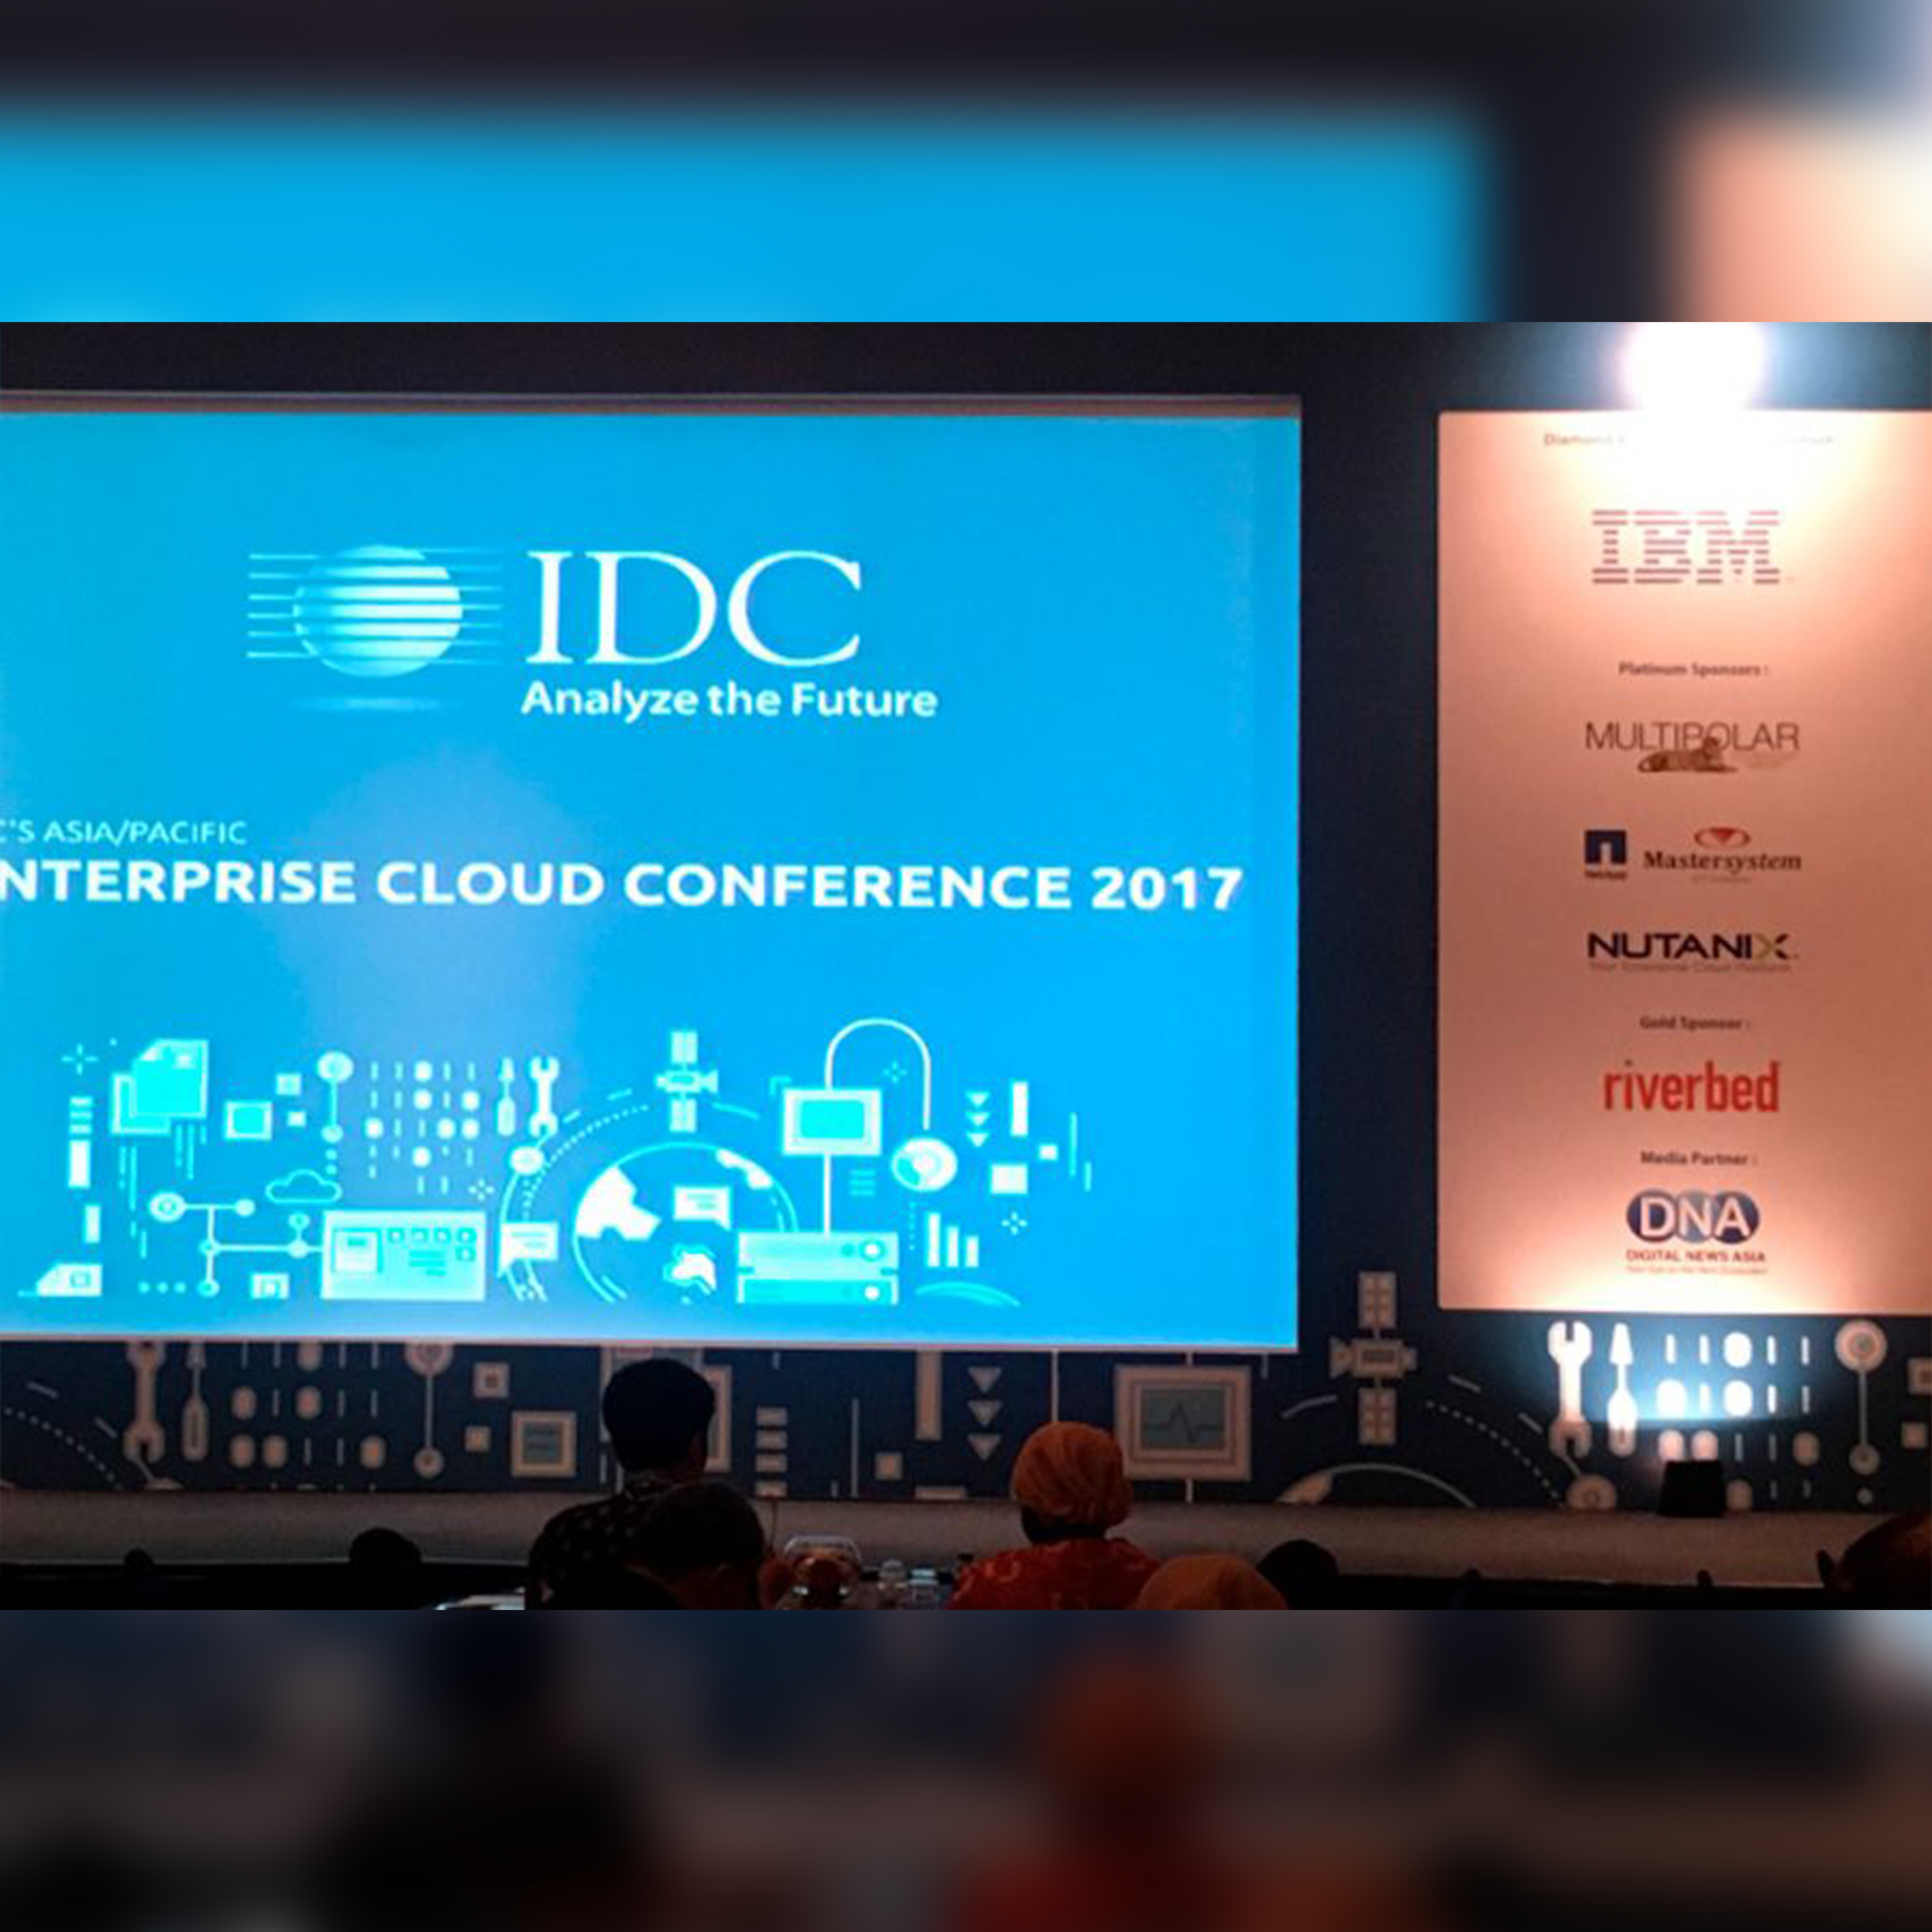 Mastersystem in IDC Enterprise Cloud Conference - May 2017